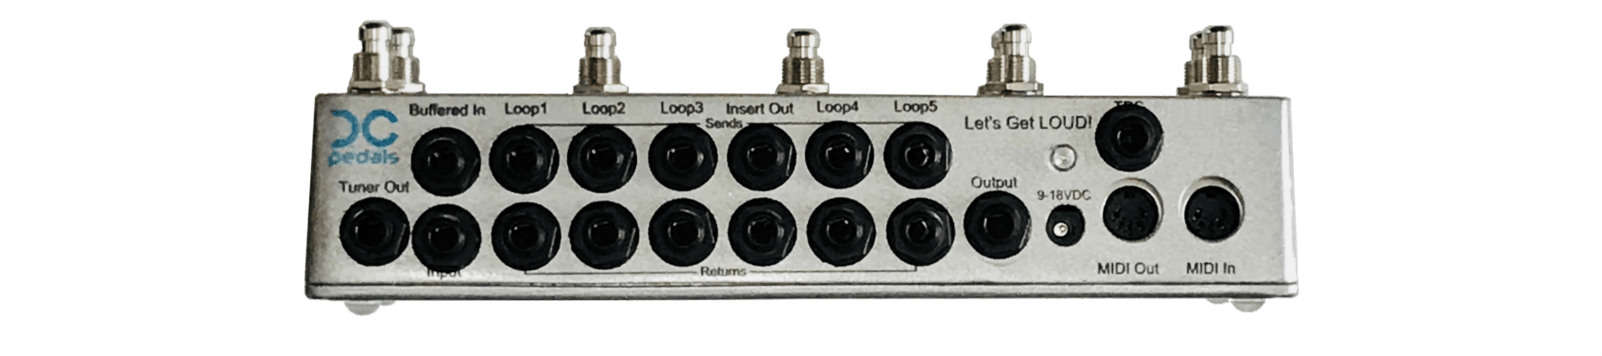 DC Pedals Bluetooth Looper sends and returns offer plenty of connections.